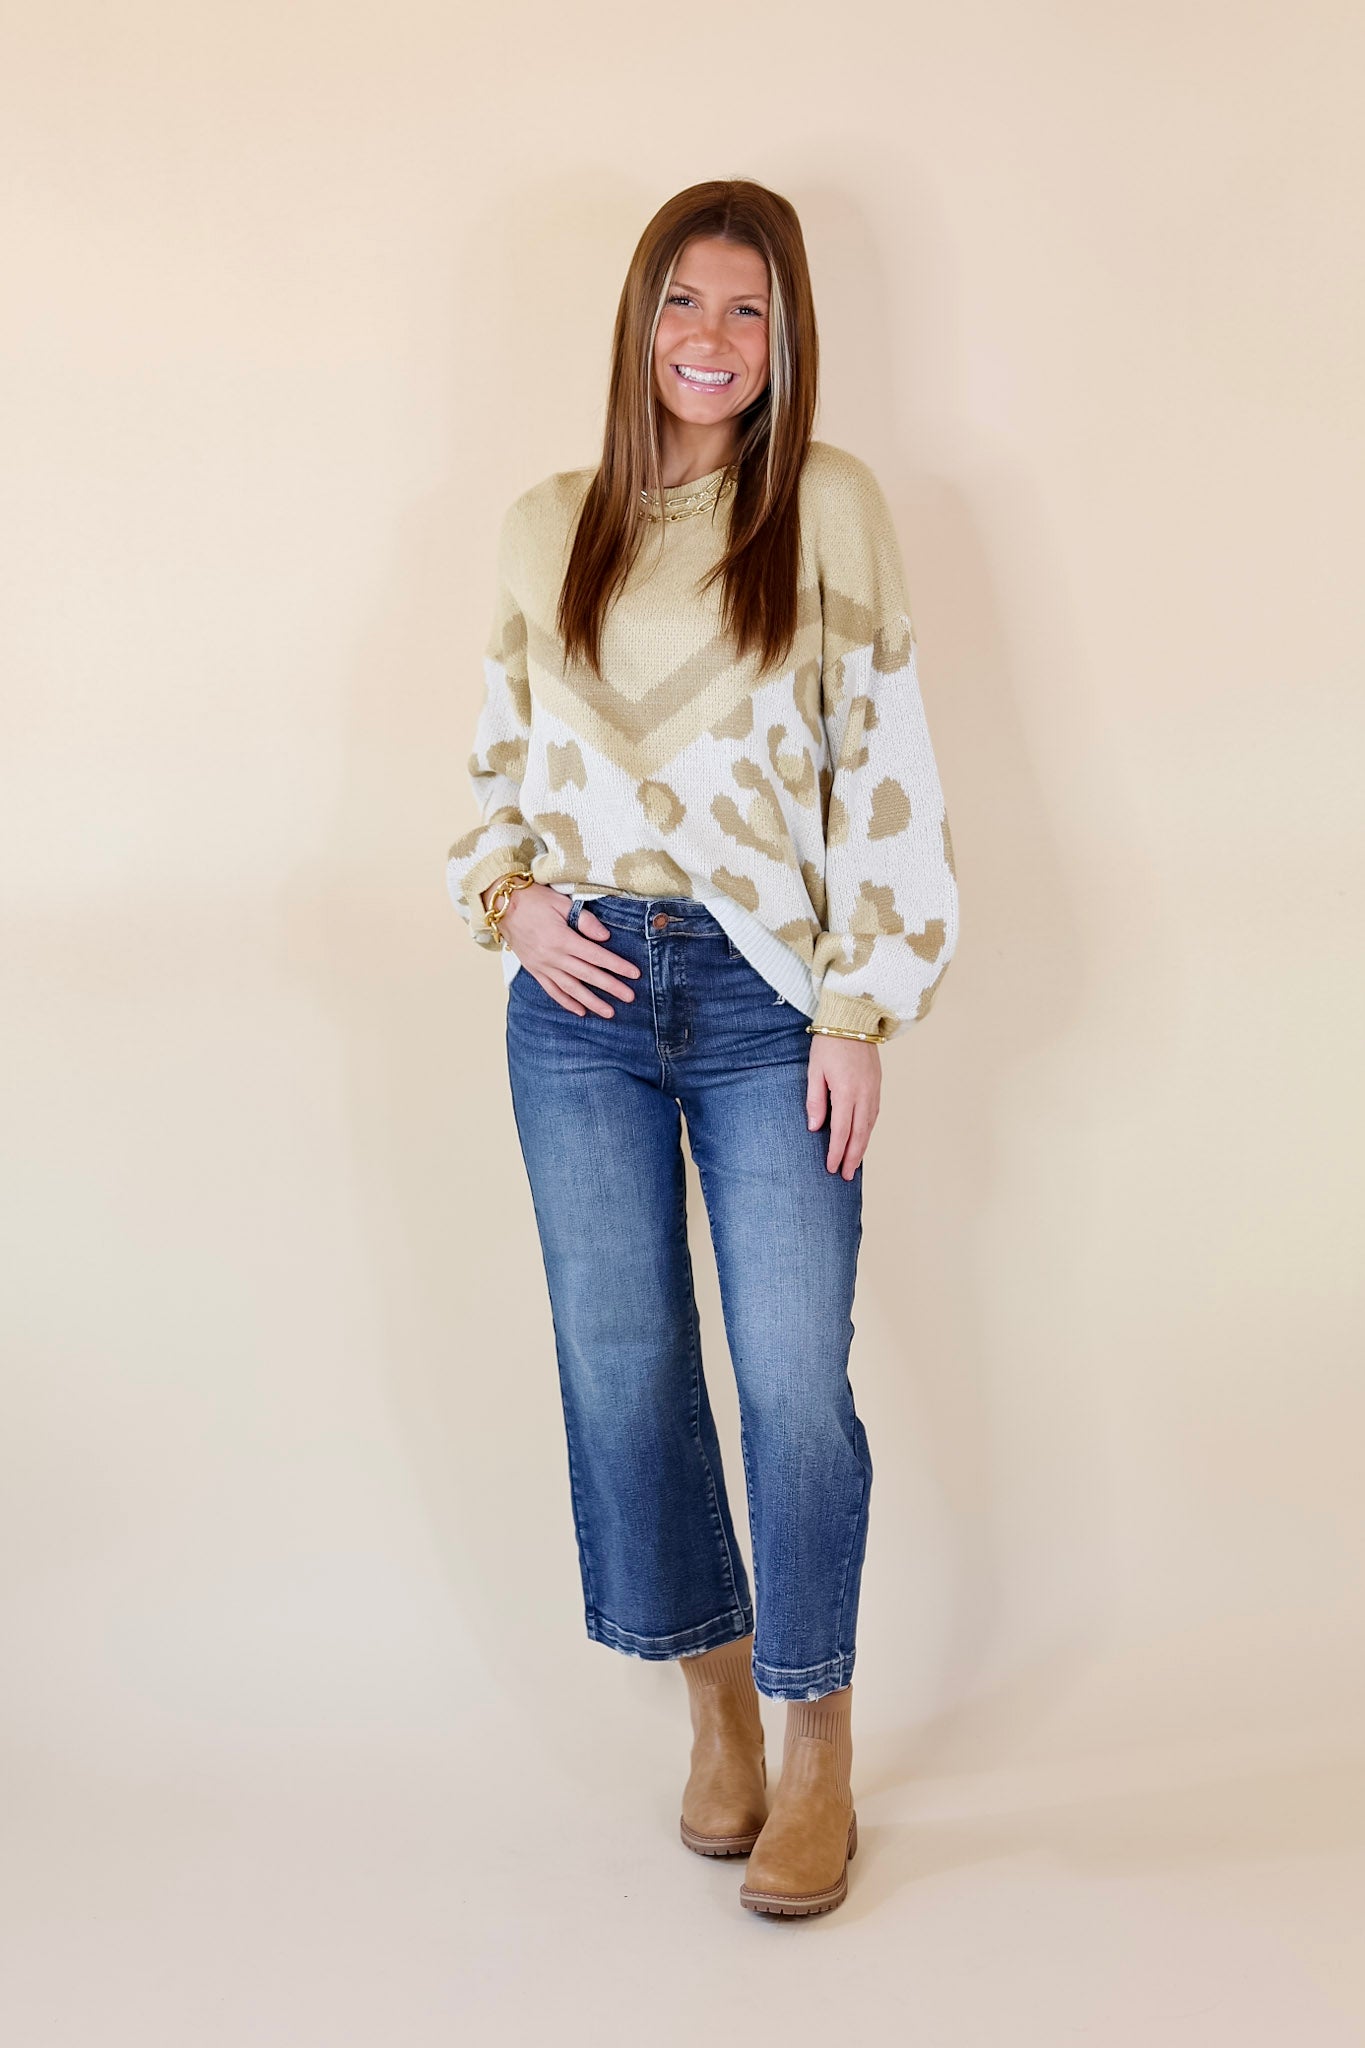 Thankful Thoughts Leopard Print and Chevron Print Block Sweater in Beige - Giddy Up Glamour Boutique